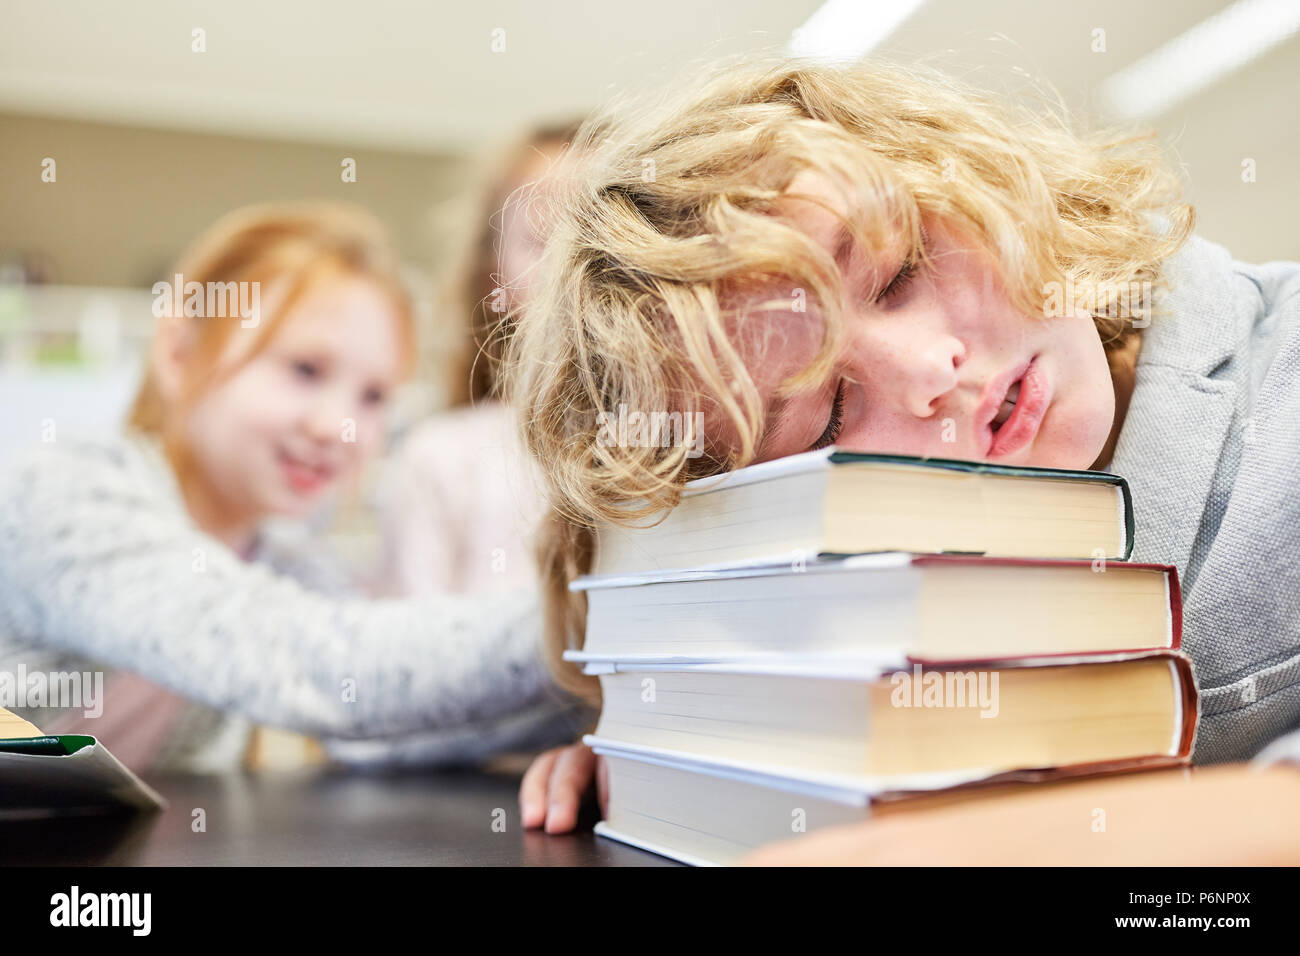 Pupil sleeps exhausted with his head on a pile of books in class Stock Photo